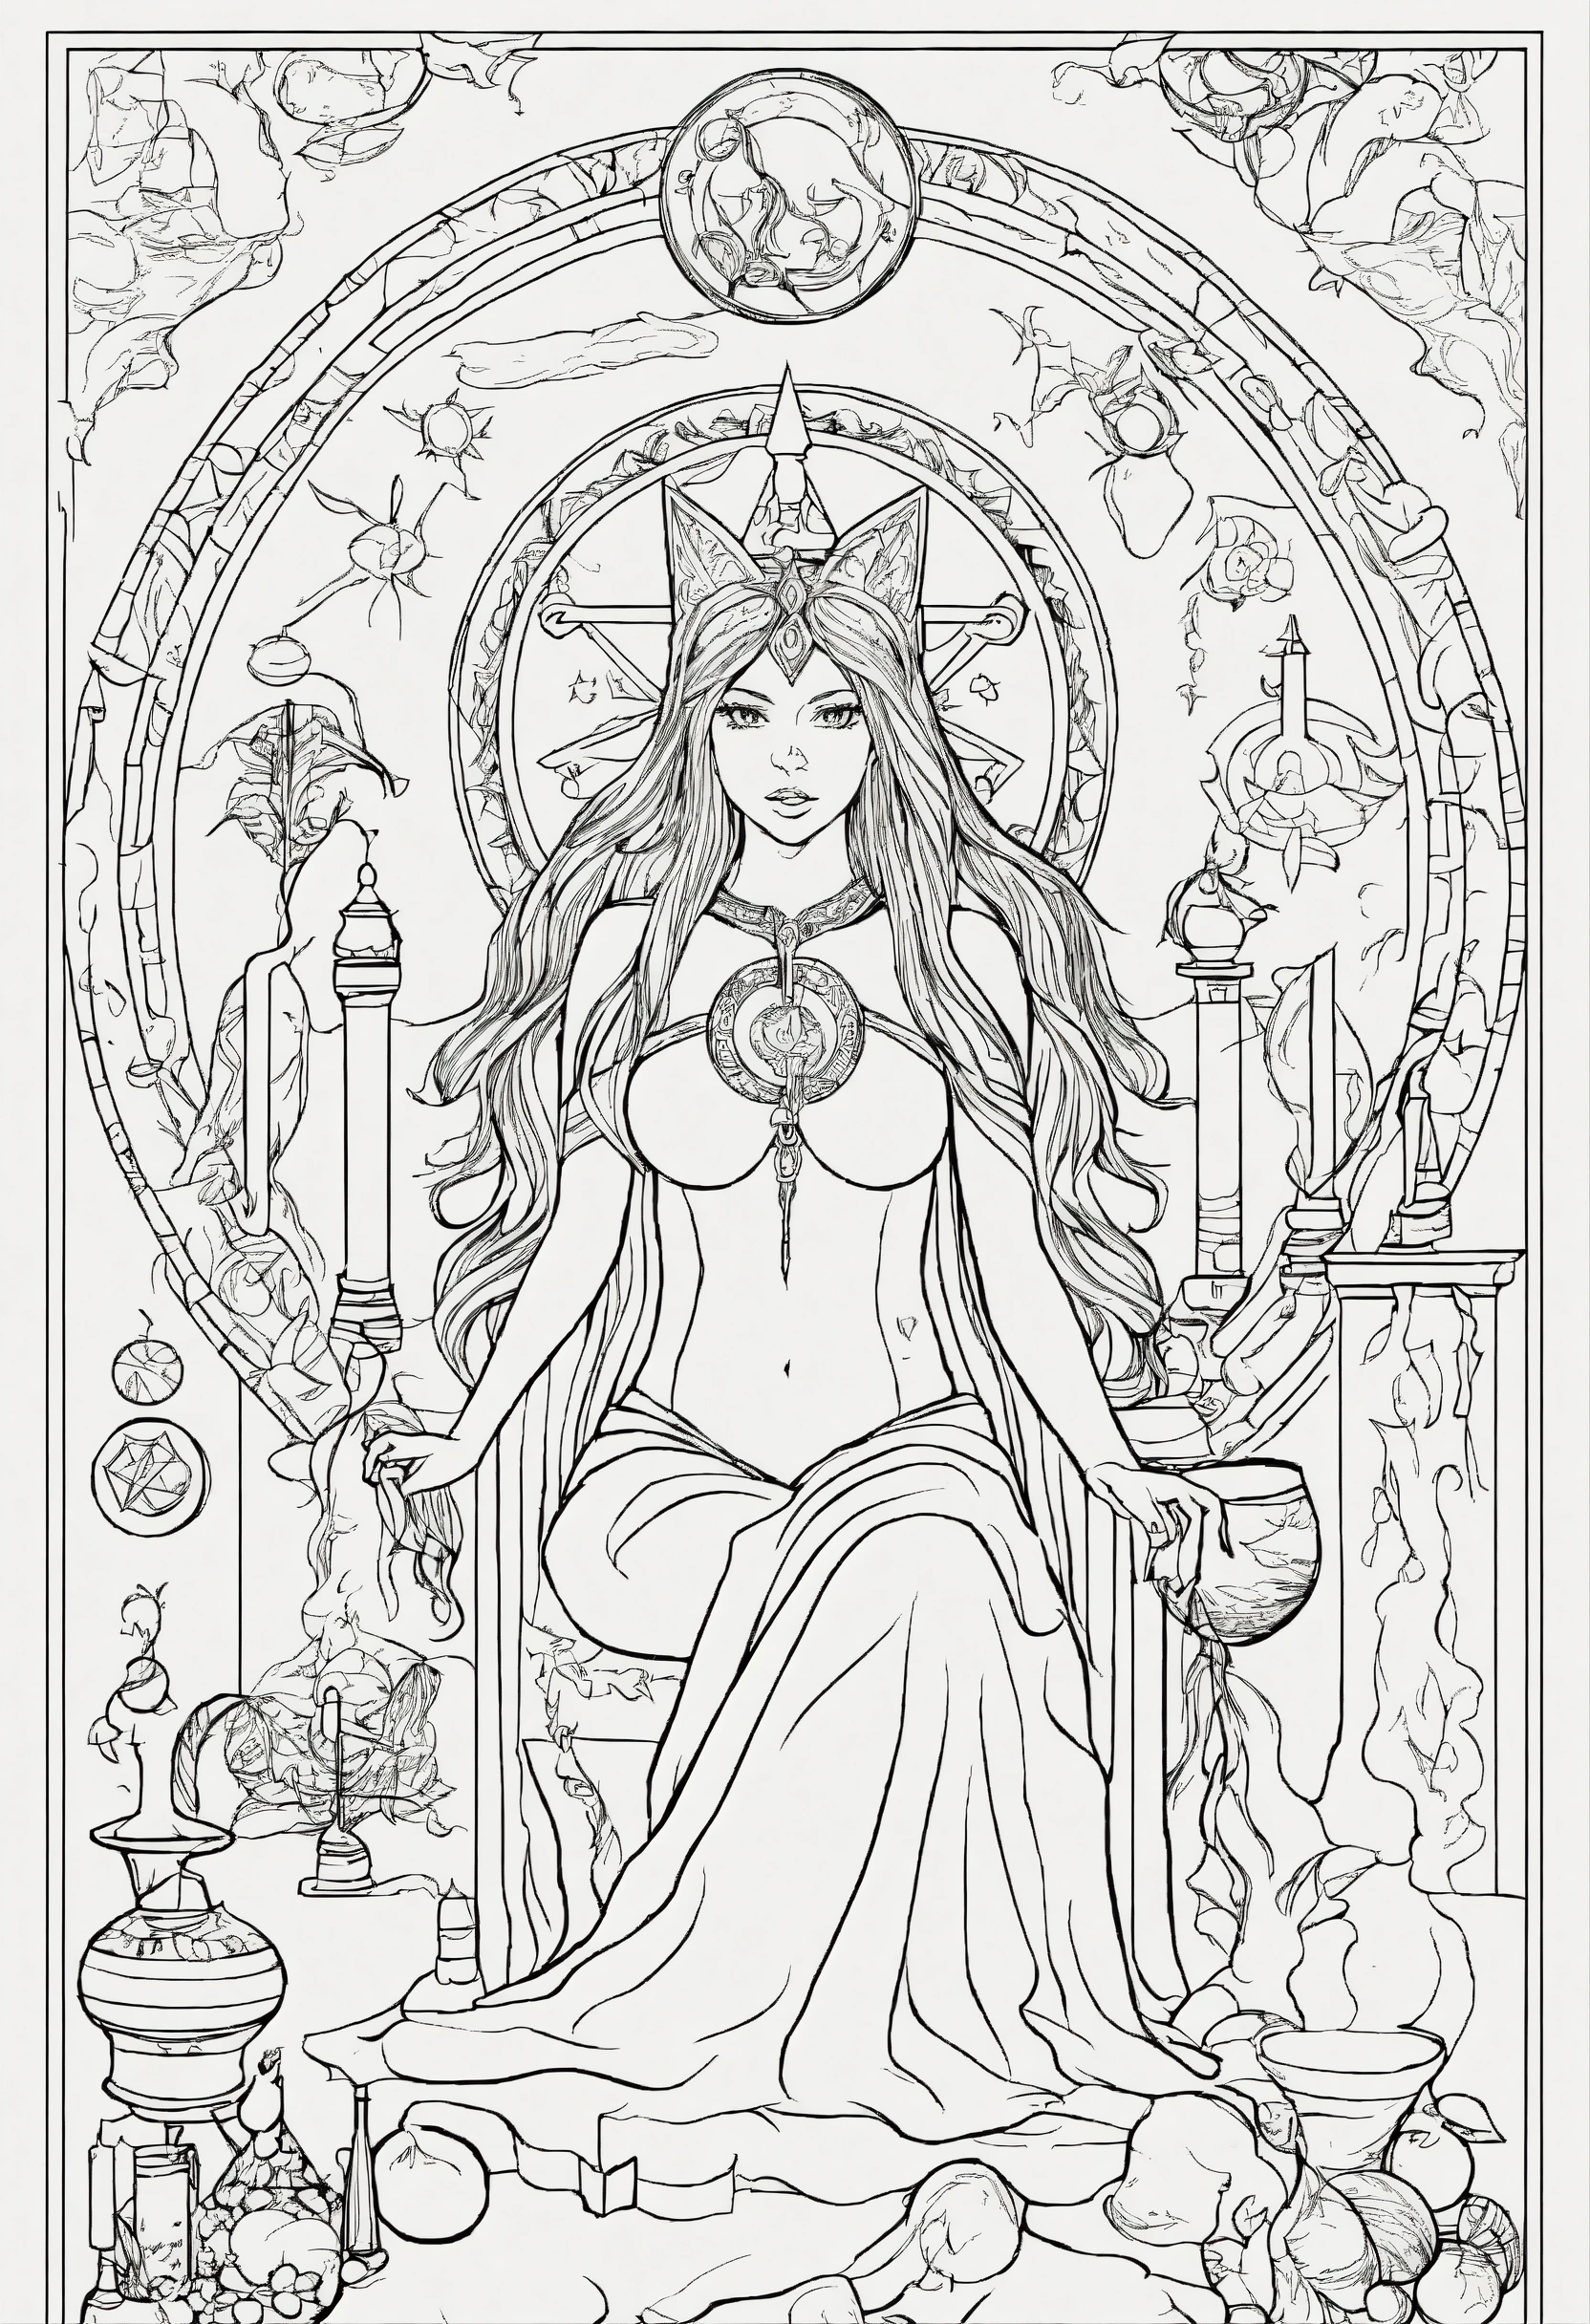 Lexica - Simple adult coloring book page featuring a witchy pagan